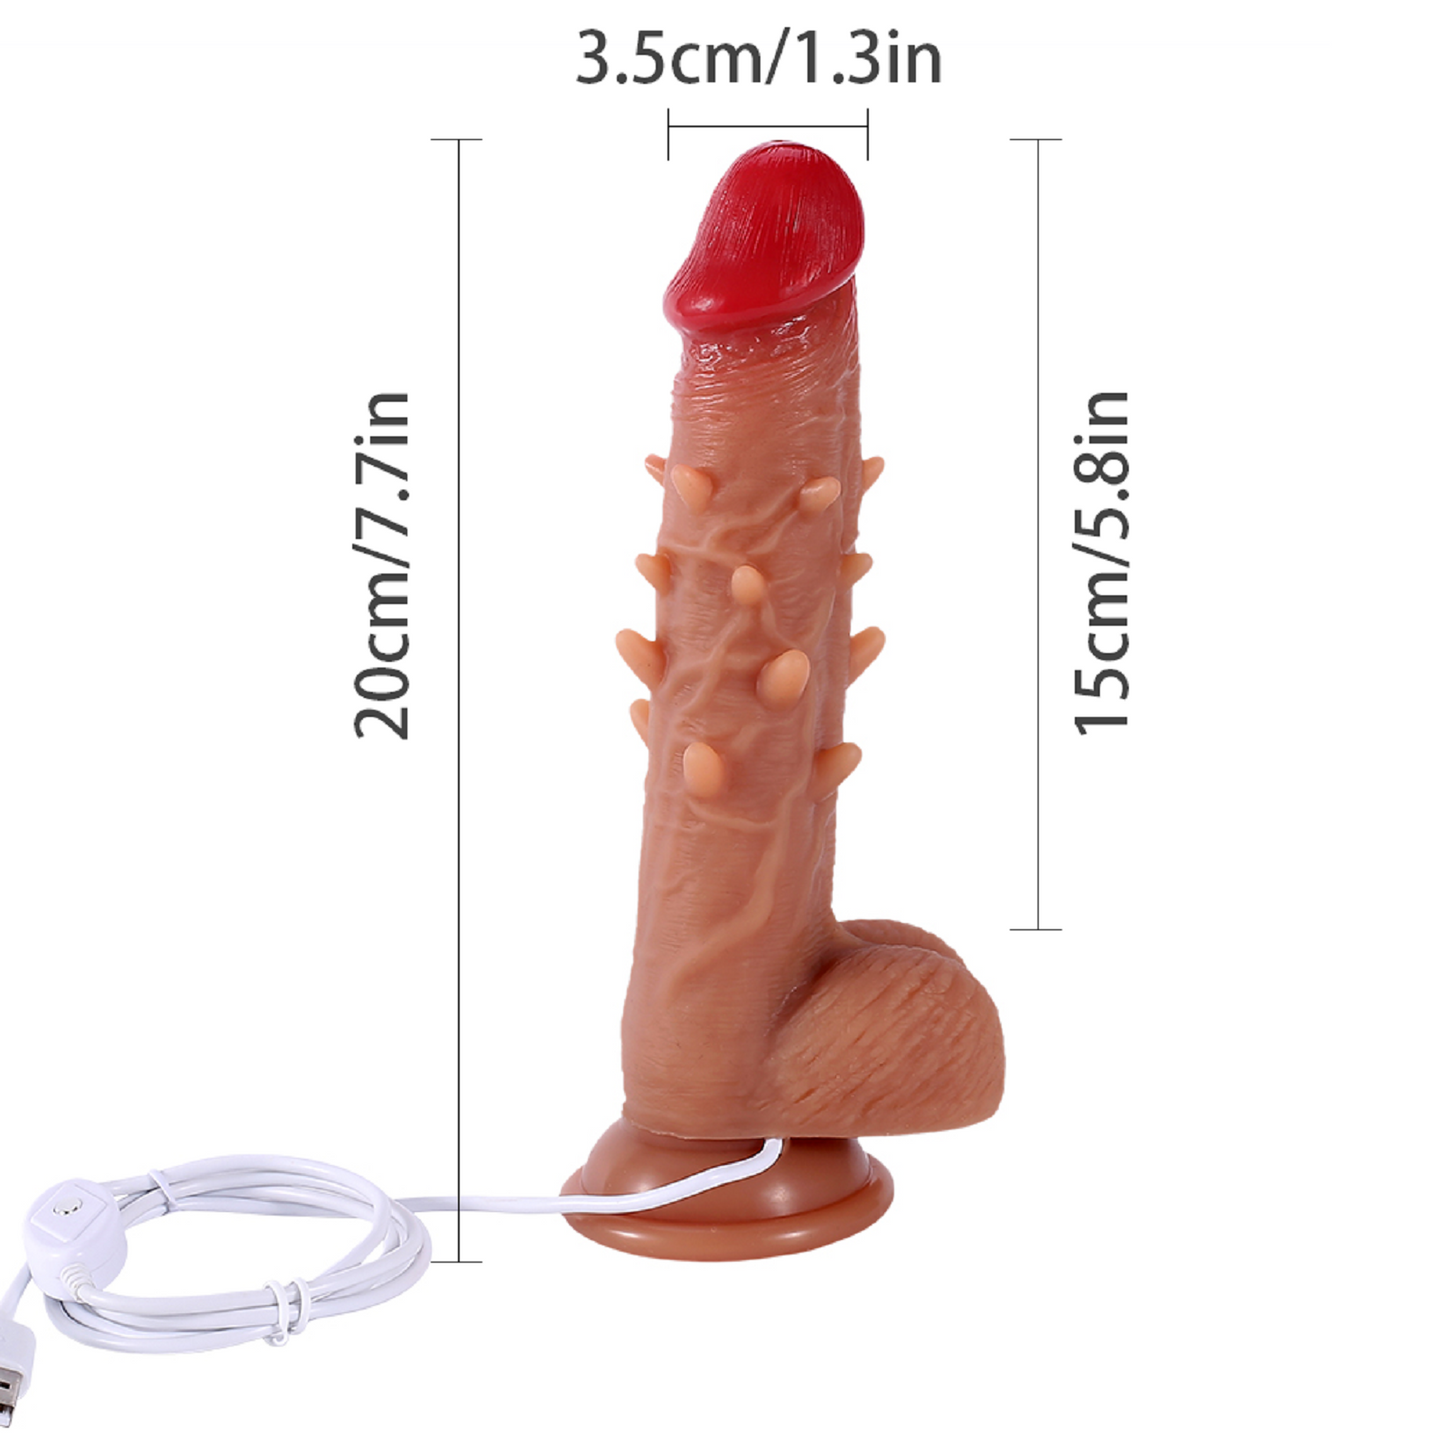 Wired Dildo Vibrator Swing Telescopic Thrusting Dong Wriggle GSpot Penis Sex Toy